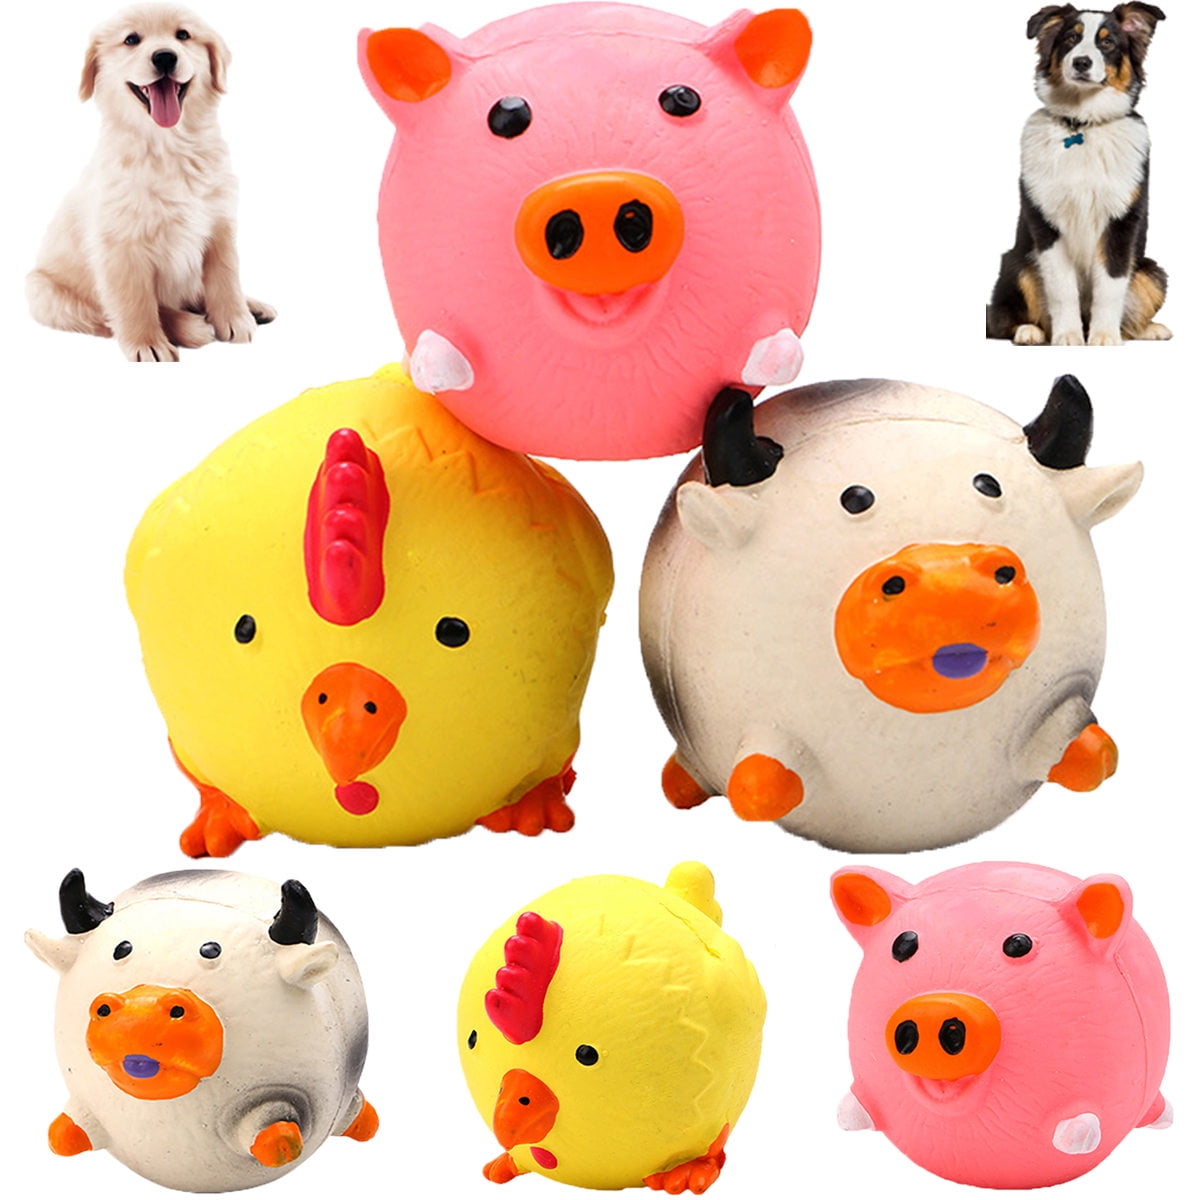 Dog Play Squeaky Dog Toy Chew Toy Puppy Novelty Durable Waterproof